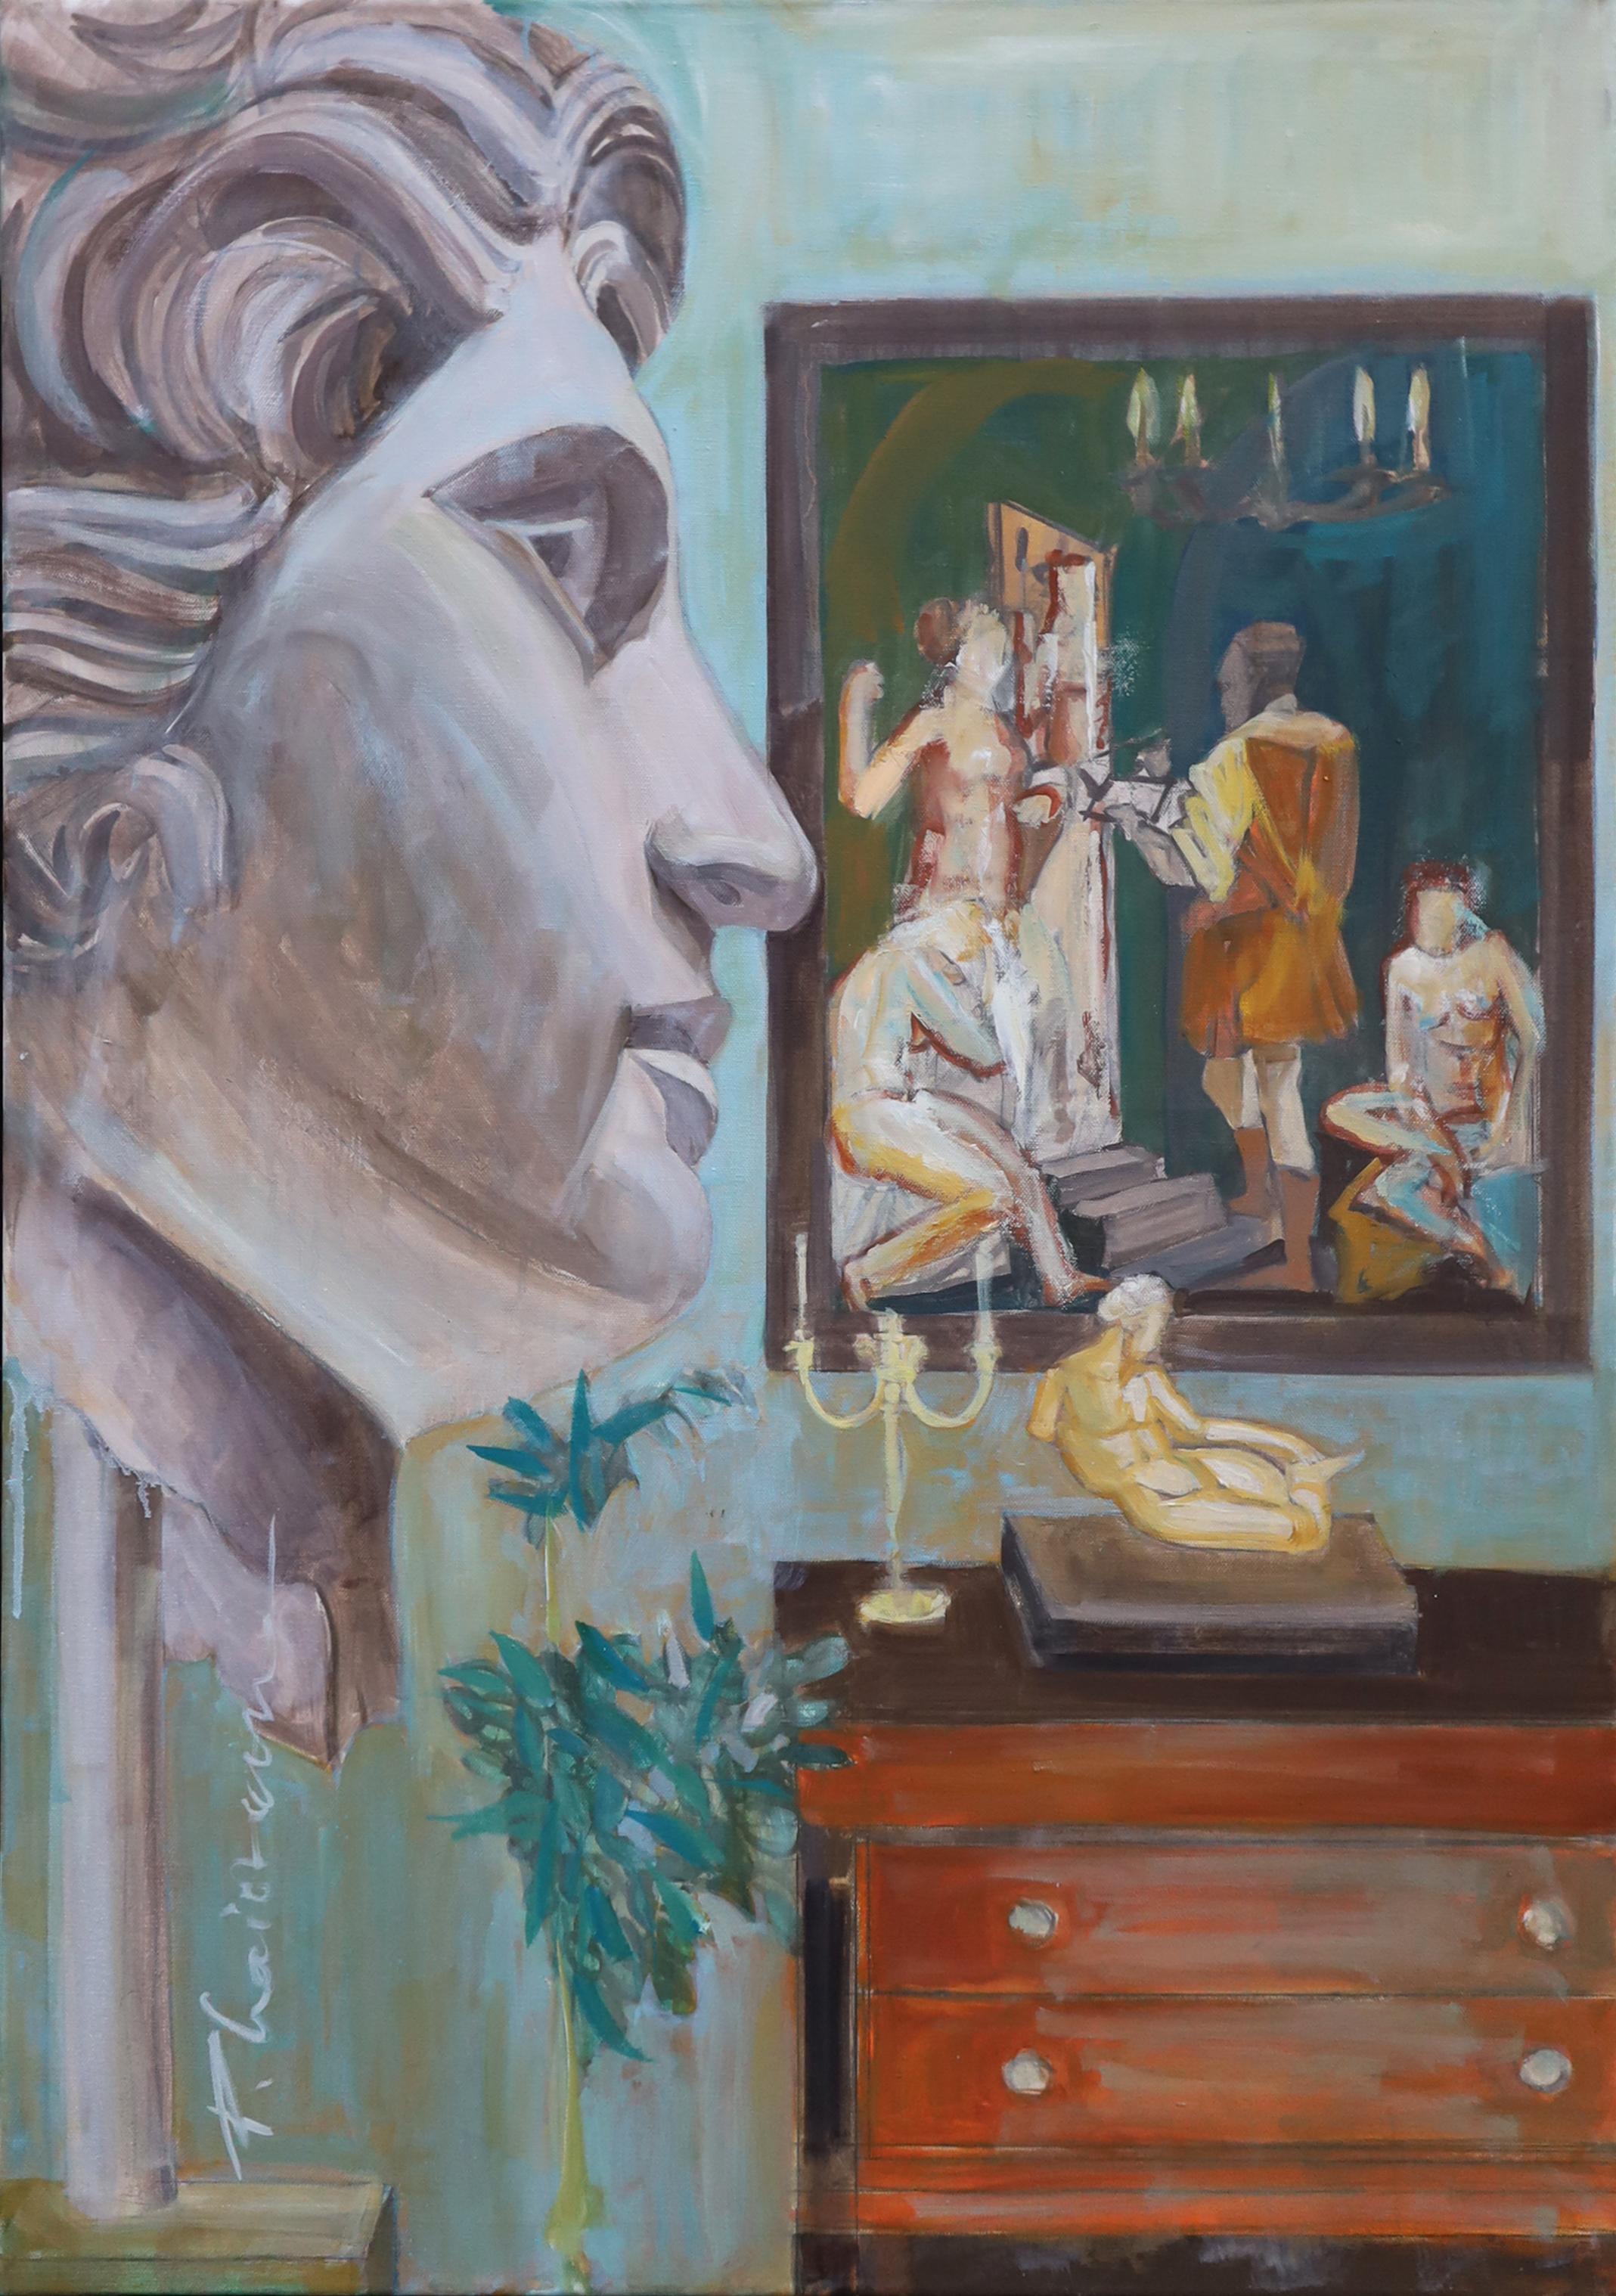 "The Painter's Studio", oil on canvas, 39x27.5in / 100x70cm

The artist's studio and art objects part of his life and work. A sculpture, an antique head and a painting that reminds us of Vasari's depiction of his studio.  Painting within a painting,